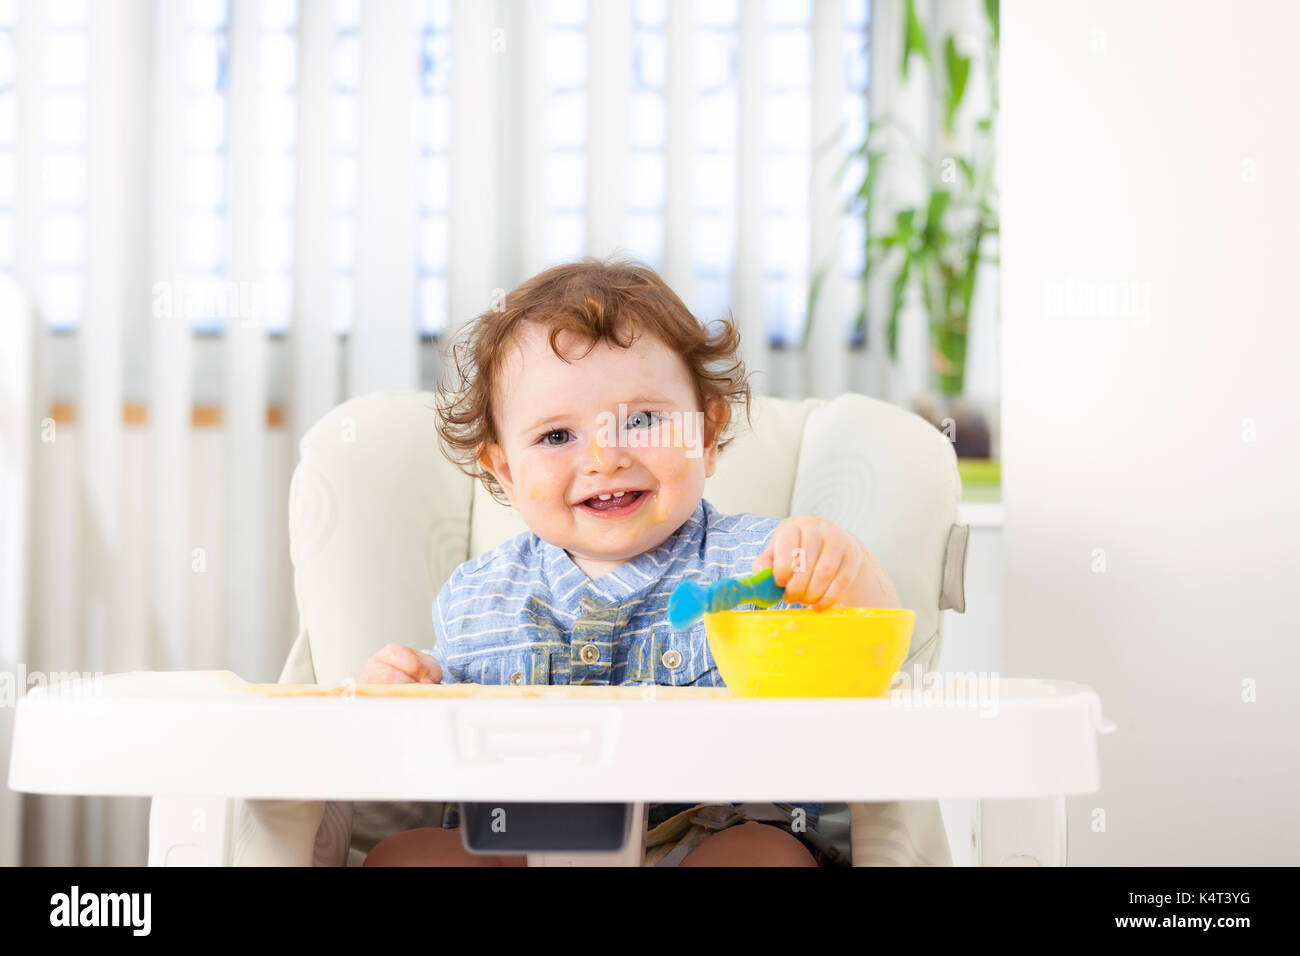 Cute baby boy eating by himself on high chair Stock Photo